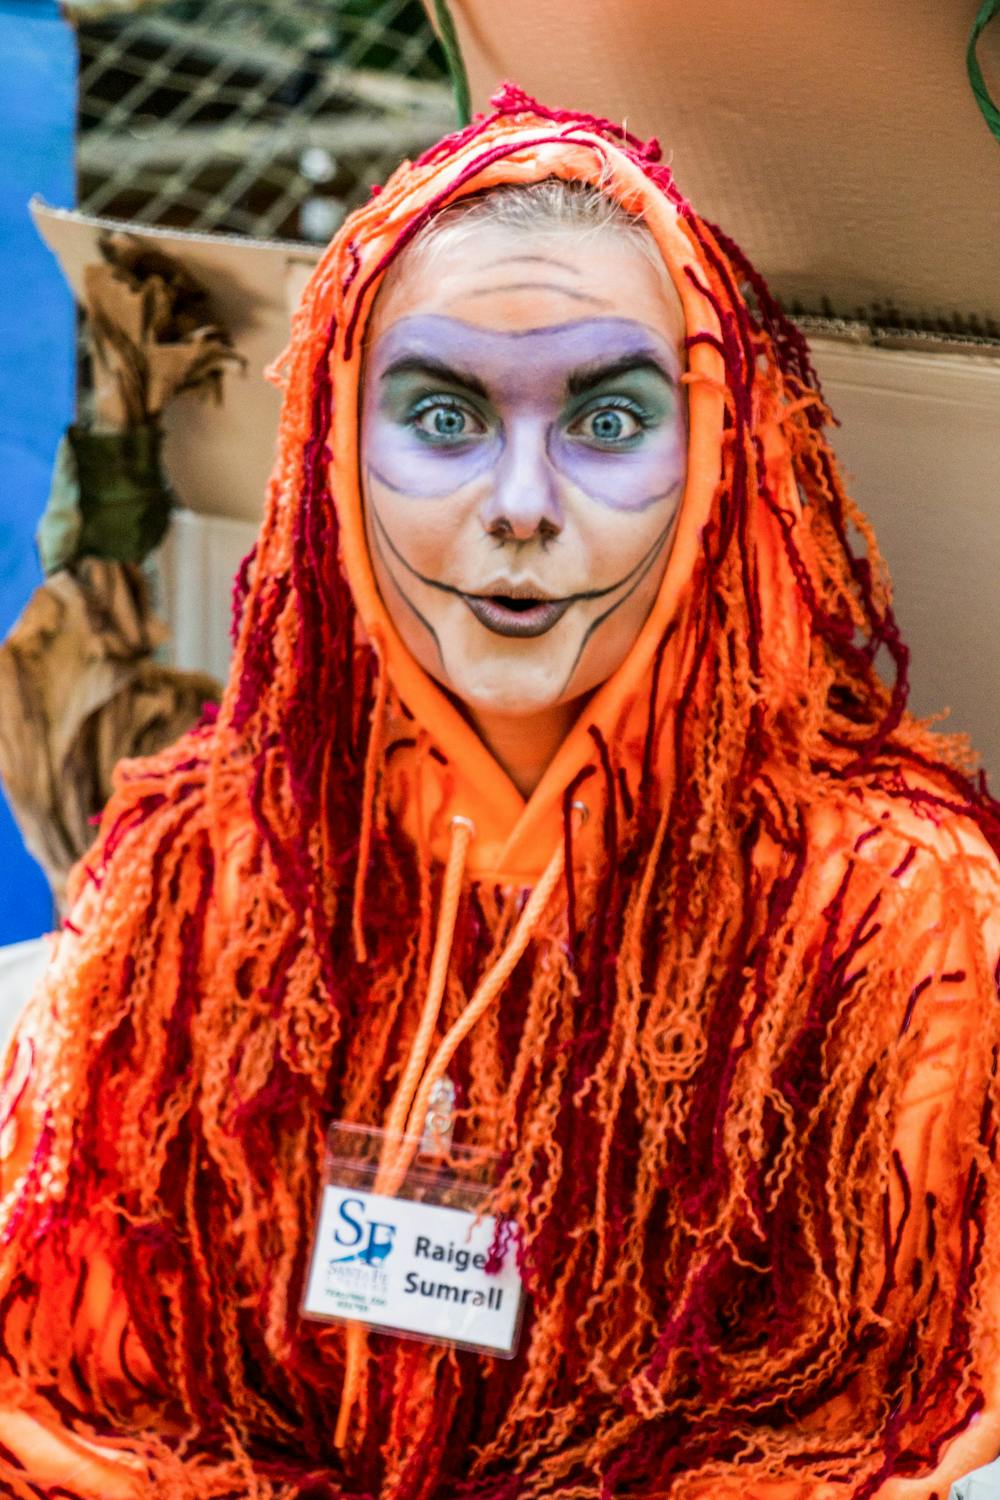 <p dir="ltr">Raigen Sumrall, 19, a Santa Fe College zoology student, dresses as King Louie from “The Jungle Book” during Santa Fe’s Boo at the Zoo for Halloween on Monday afternoon. According to Santa Fe President Jackson Sasser, Boo at the Zoo happens every year on Halloween and draws about 6,000 attendees.</p>